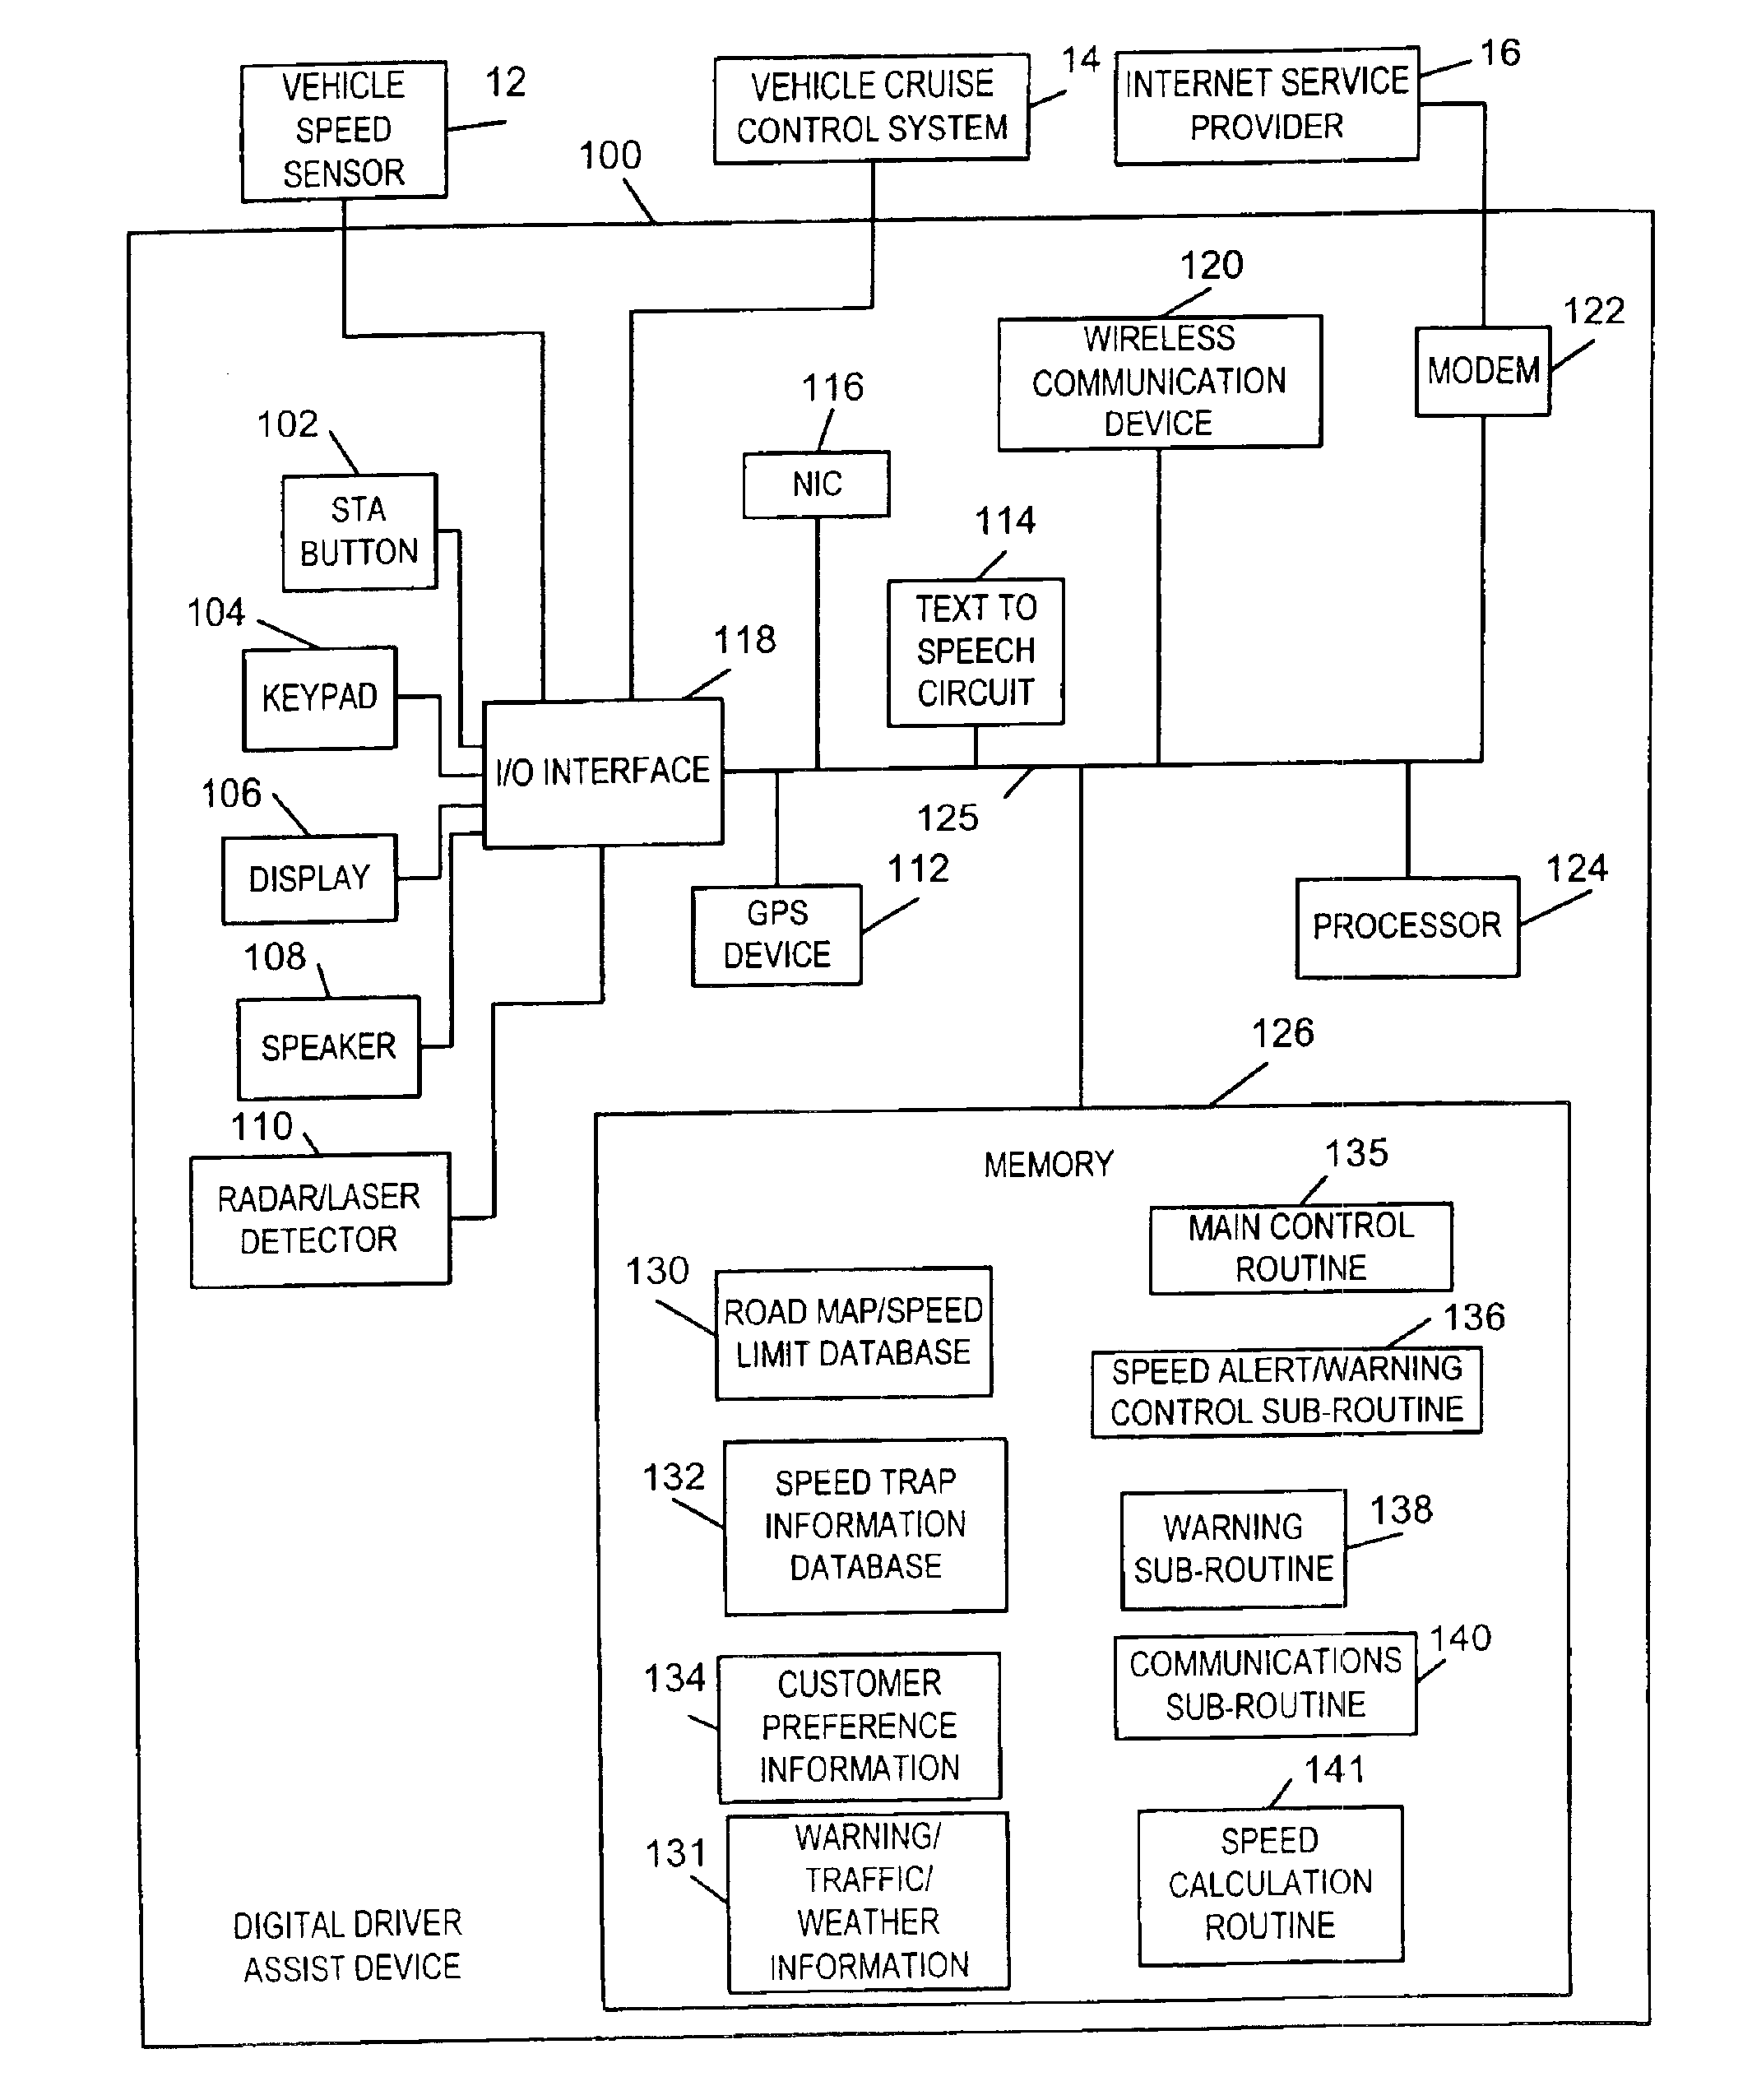 Methods and apparatus for storing, accessing, generating and using information about speed limits and speed traps